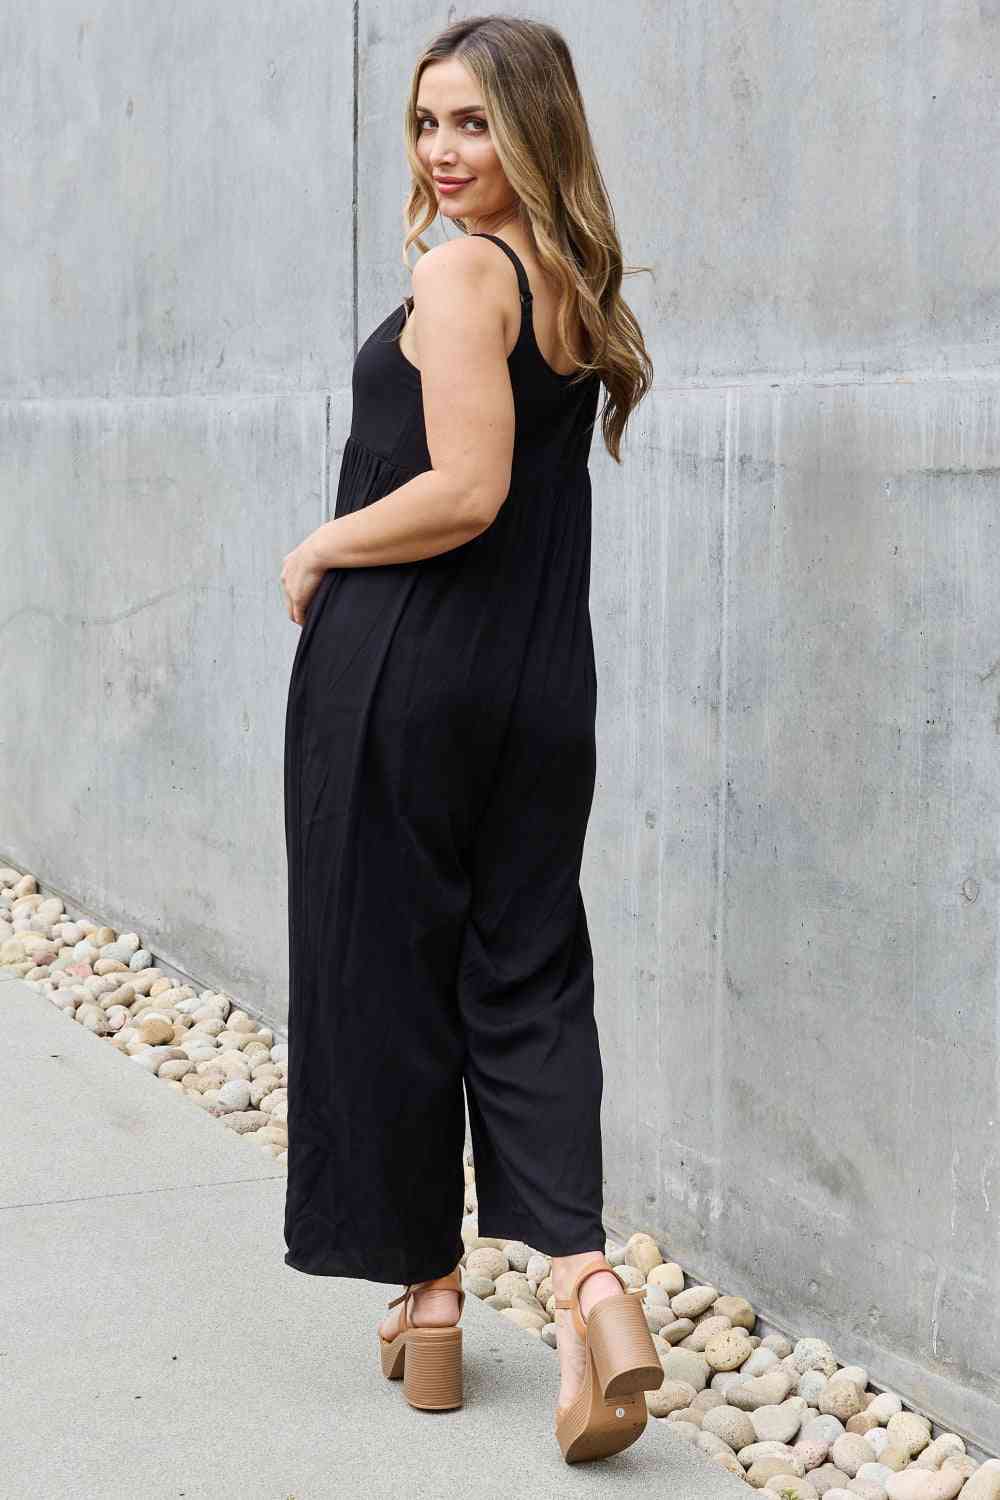 HEYSON All Day Full Size Wide Leg Button Down Jumpsuit in Black - The Teal Antler Boutique